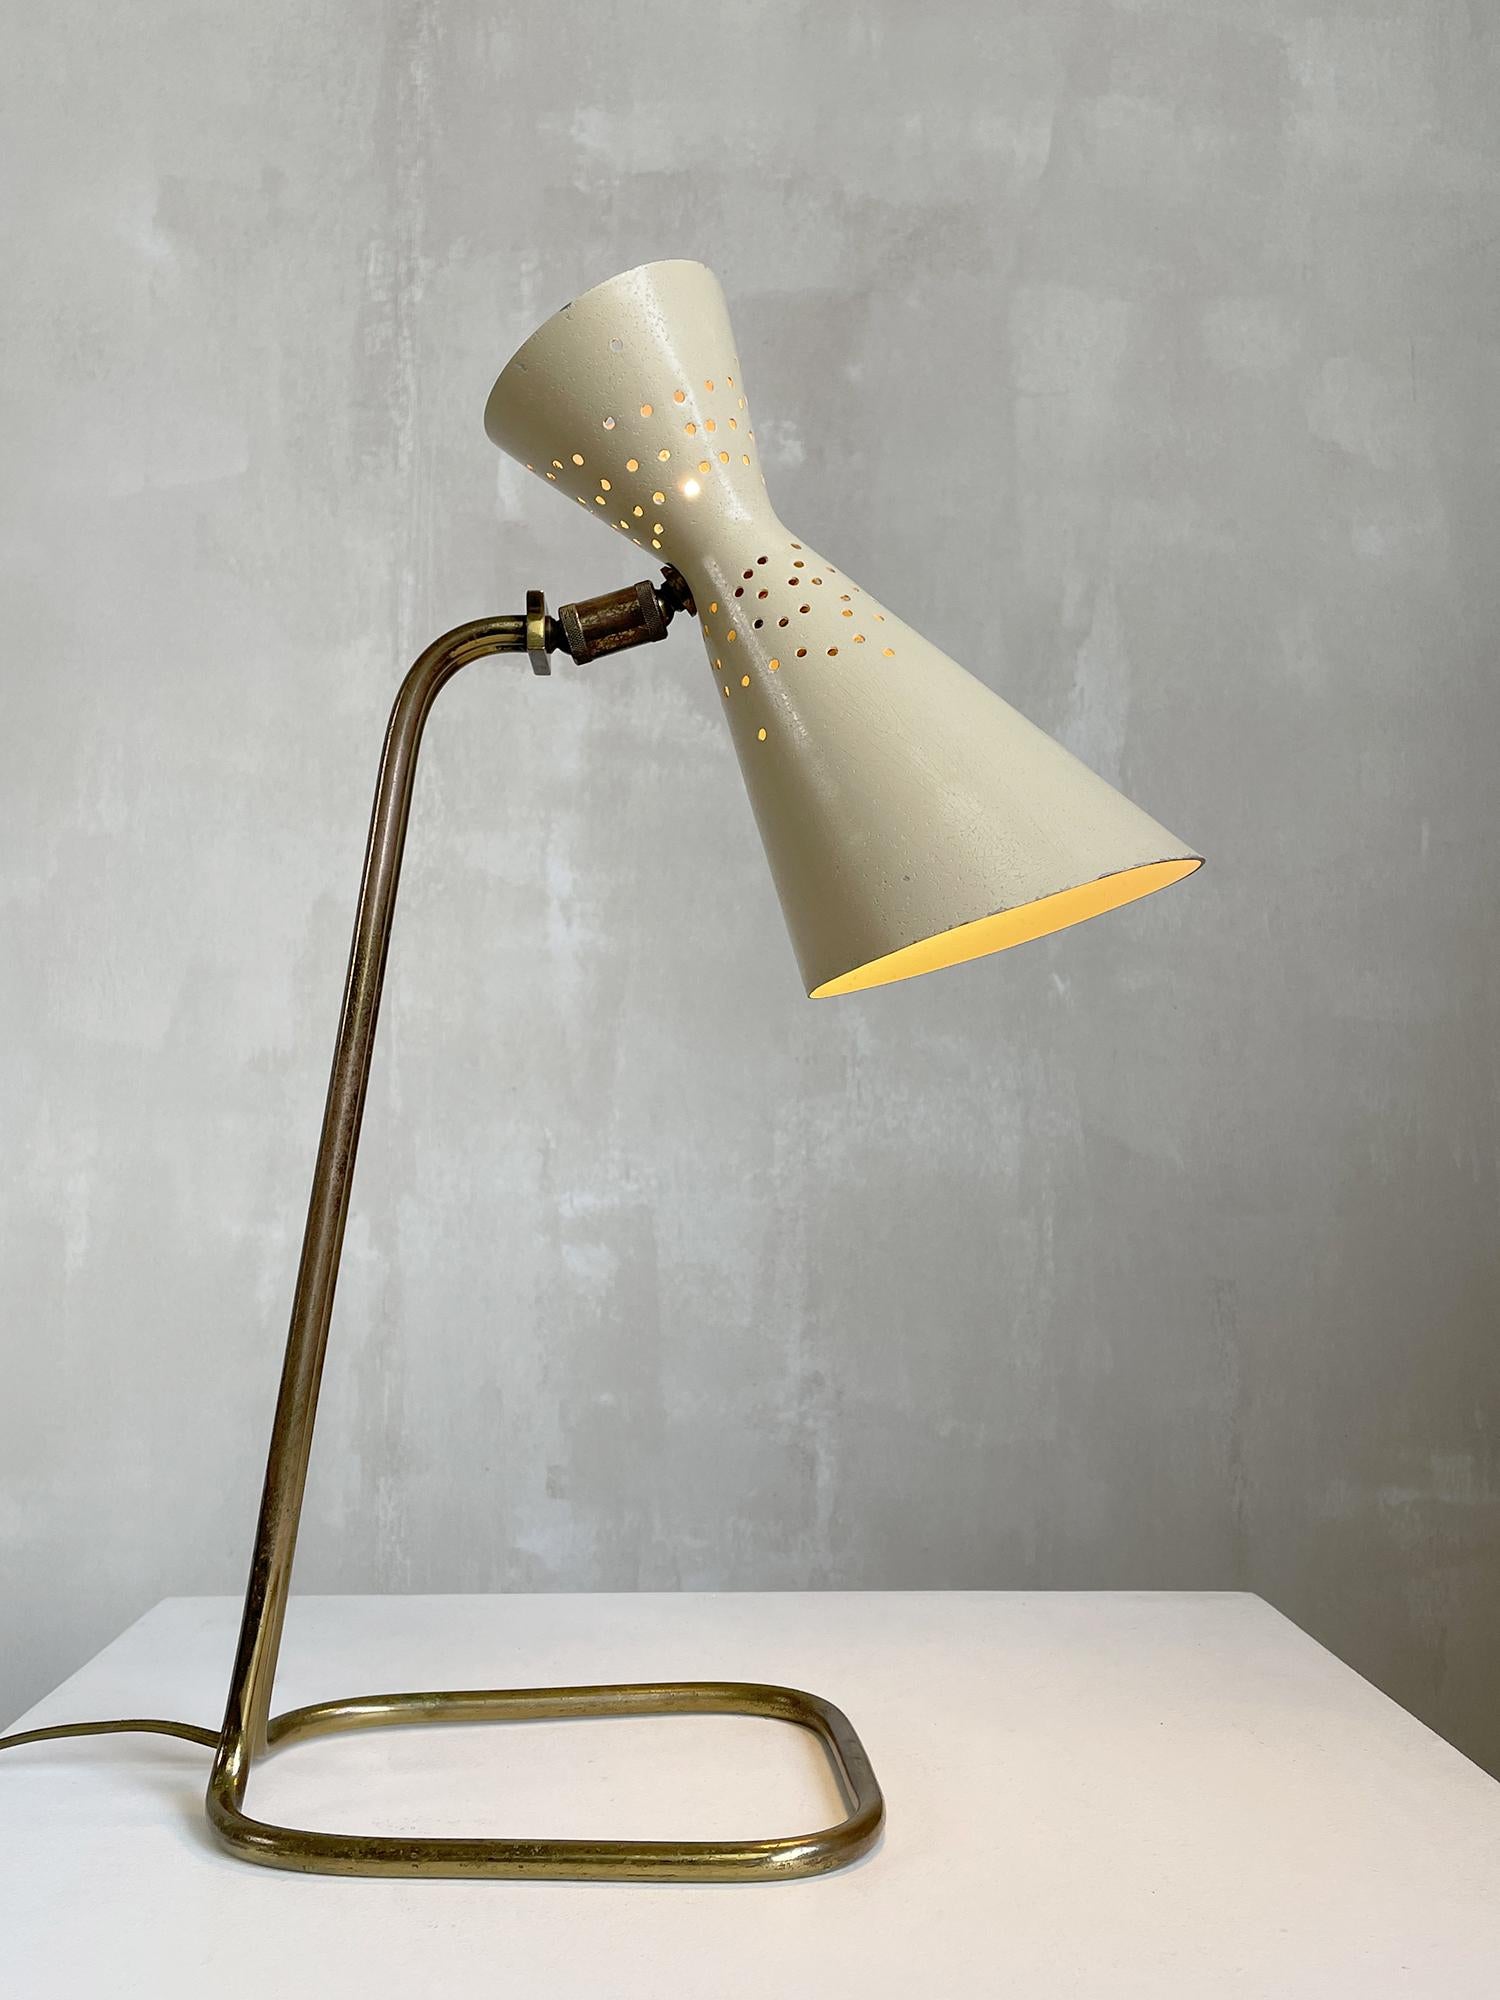 Jacques Biny for Luminalite, extremely rare desk lamp in gilded tubular metal, perforated diabolo reflector, pale yellow and white lacquer. The base is made of a single curved tube and joined at the top by a plate. The double ball joint allows